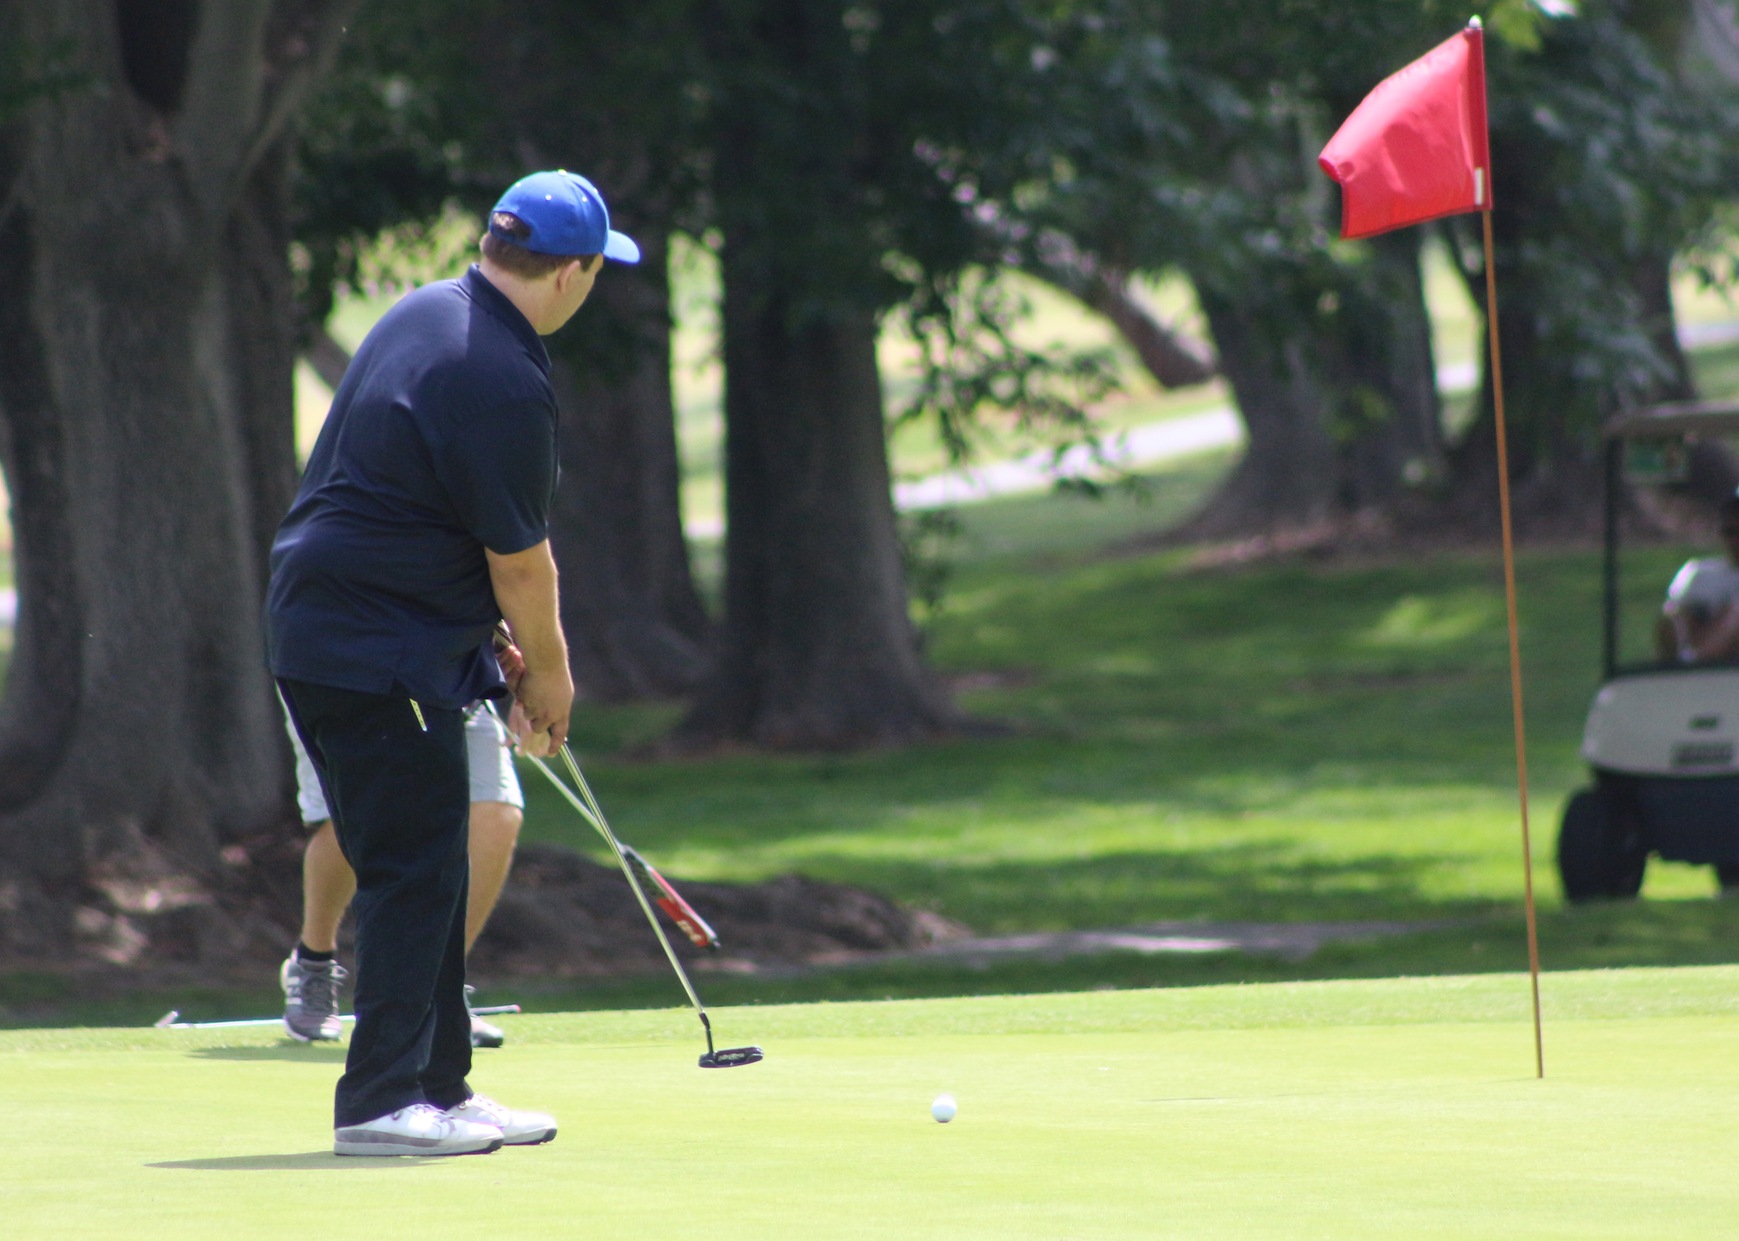 Brandon Martin watches his putt on the 5th green.